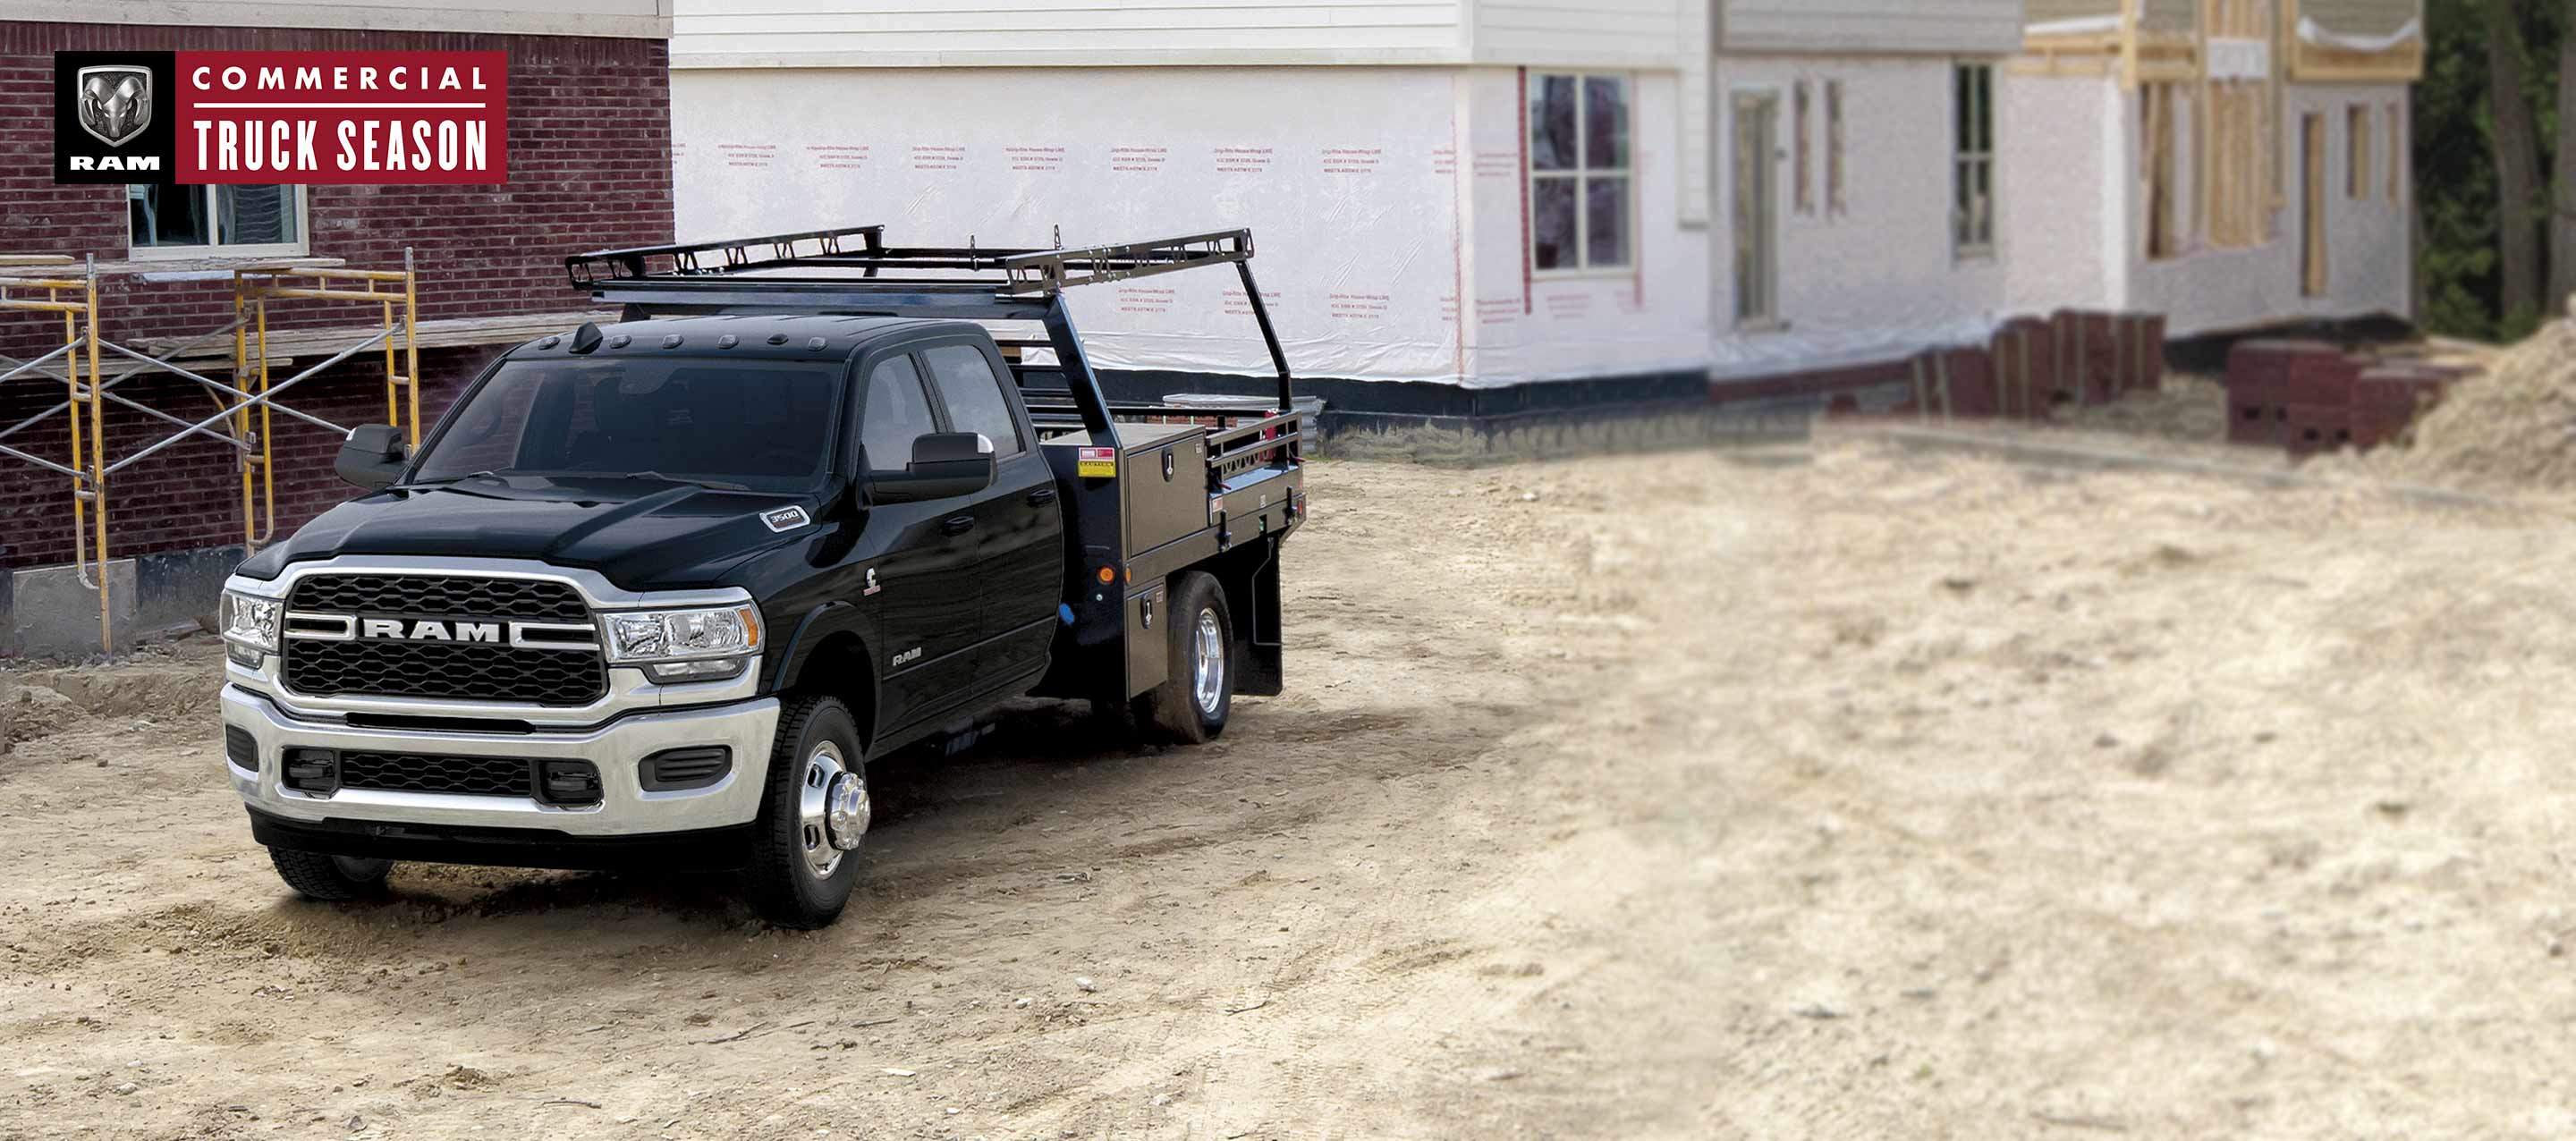 A black 2022 Ram 3500 Tradesman Chassis Cab 4x4 Crew Cab with service upfit, parked at a residential construction site. Ram Commercial Truck Season.